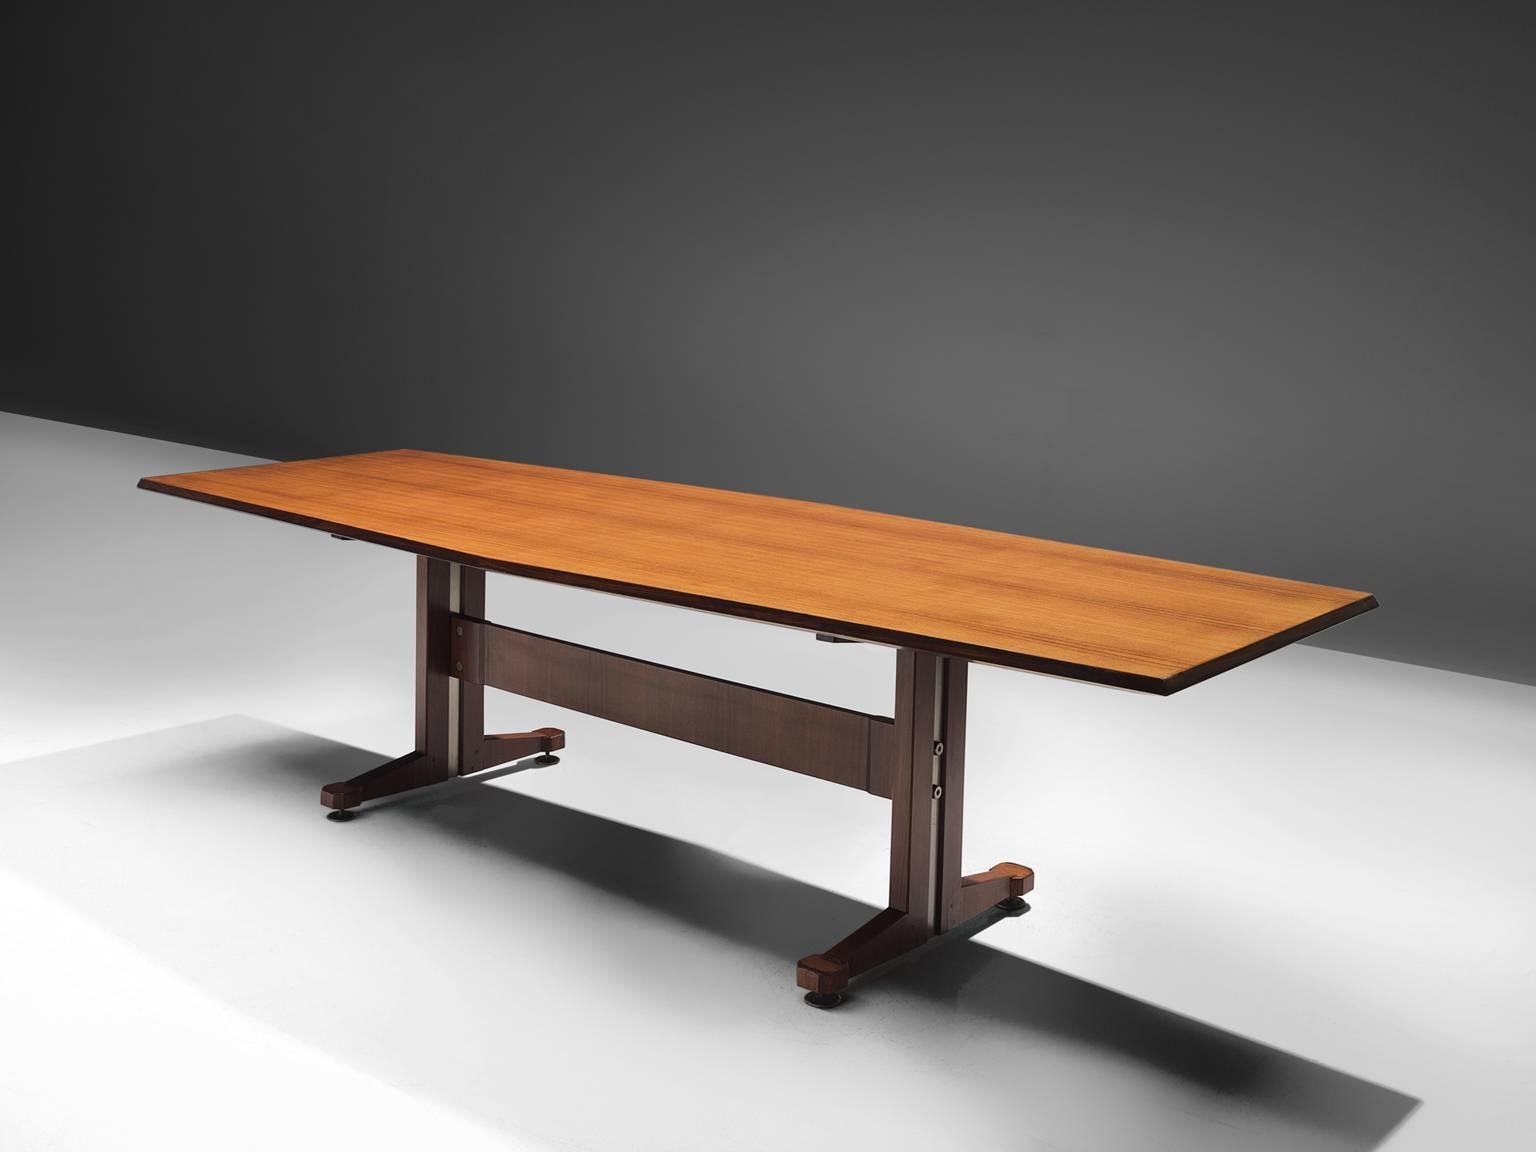 Conference table, rosewood, Italy, circa 1950

This conference table features two legs and a connecting beam. This table is features traits of the design of Borsani and Sallochi. The table's top shows beautiful grains and the frame features a